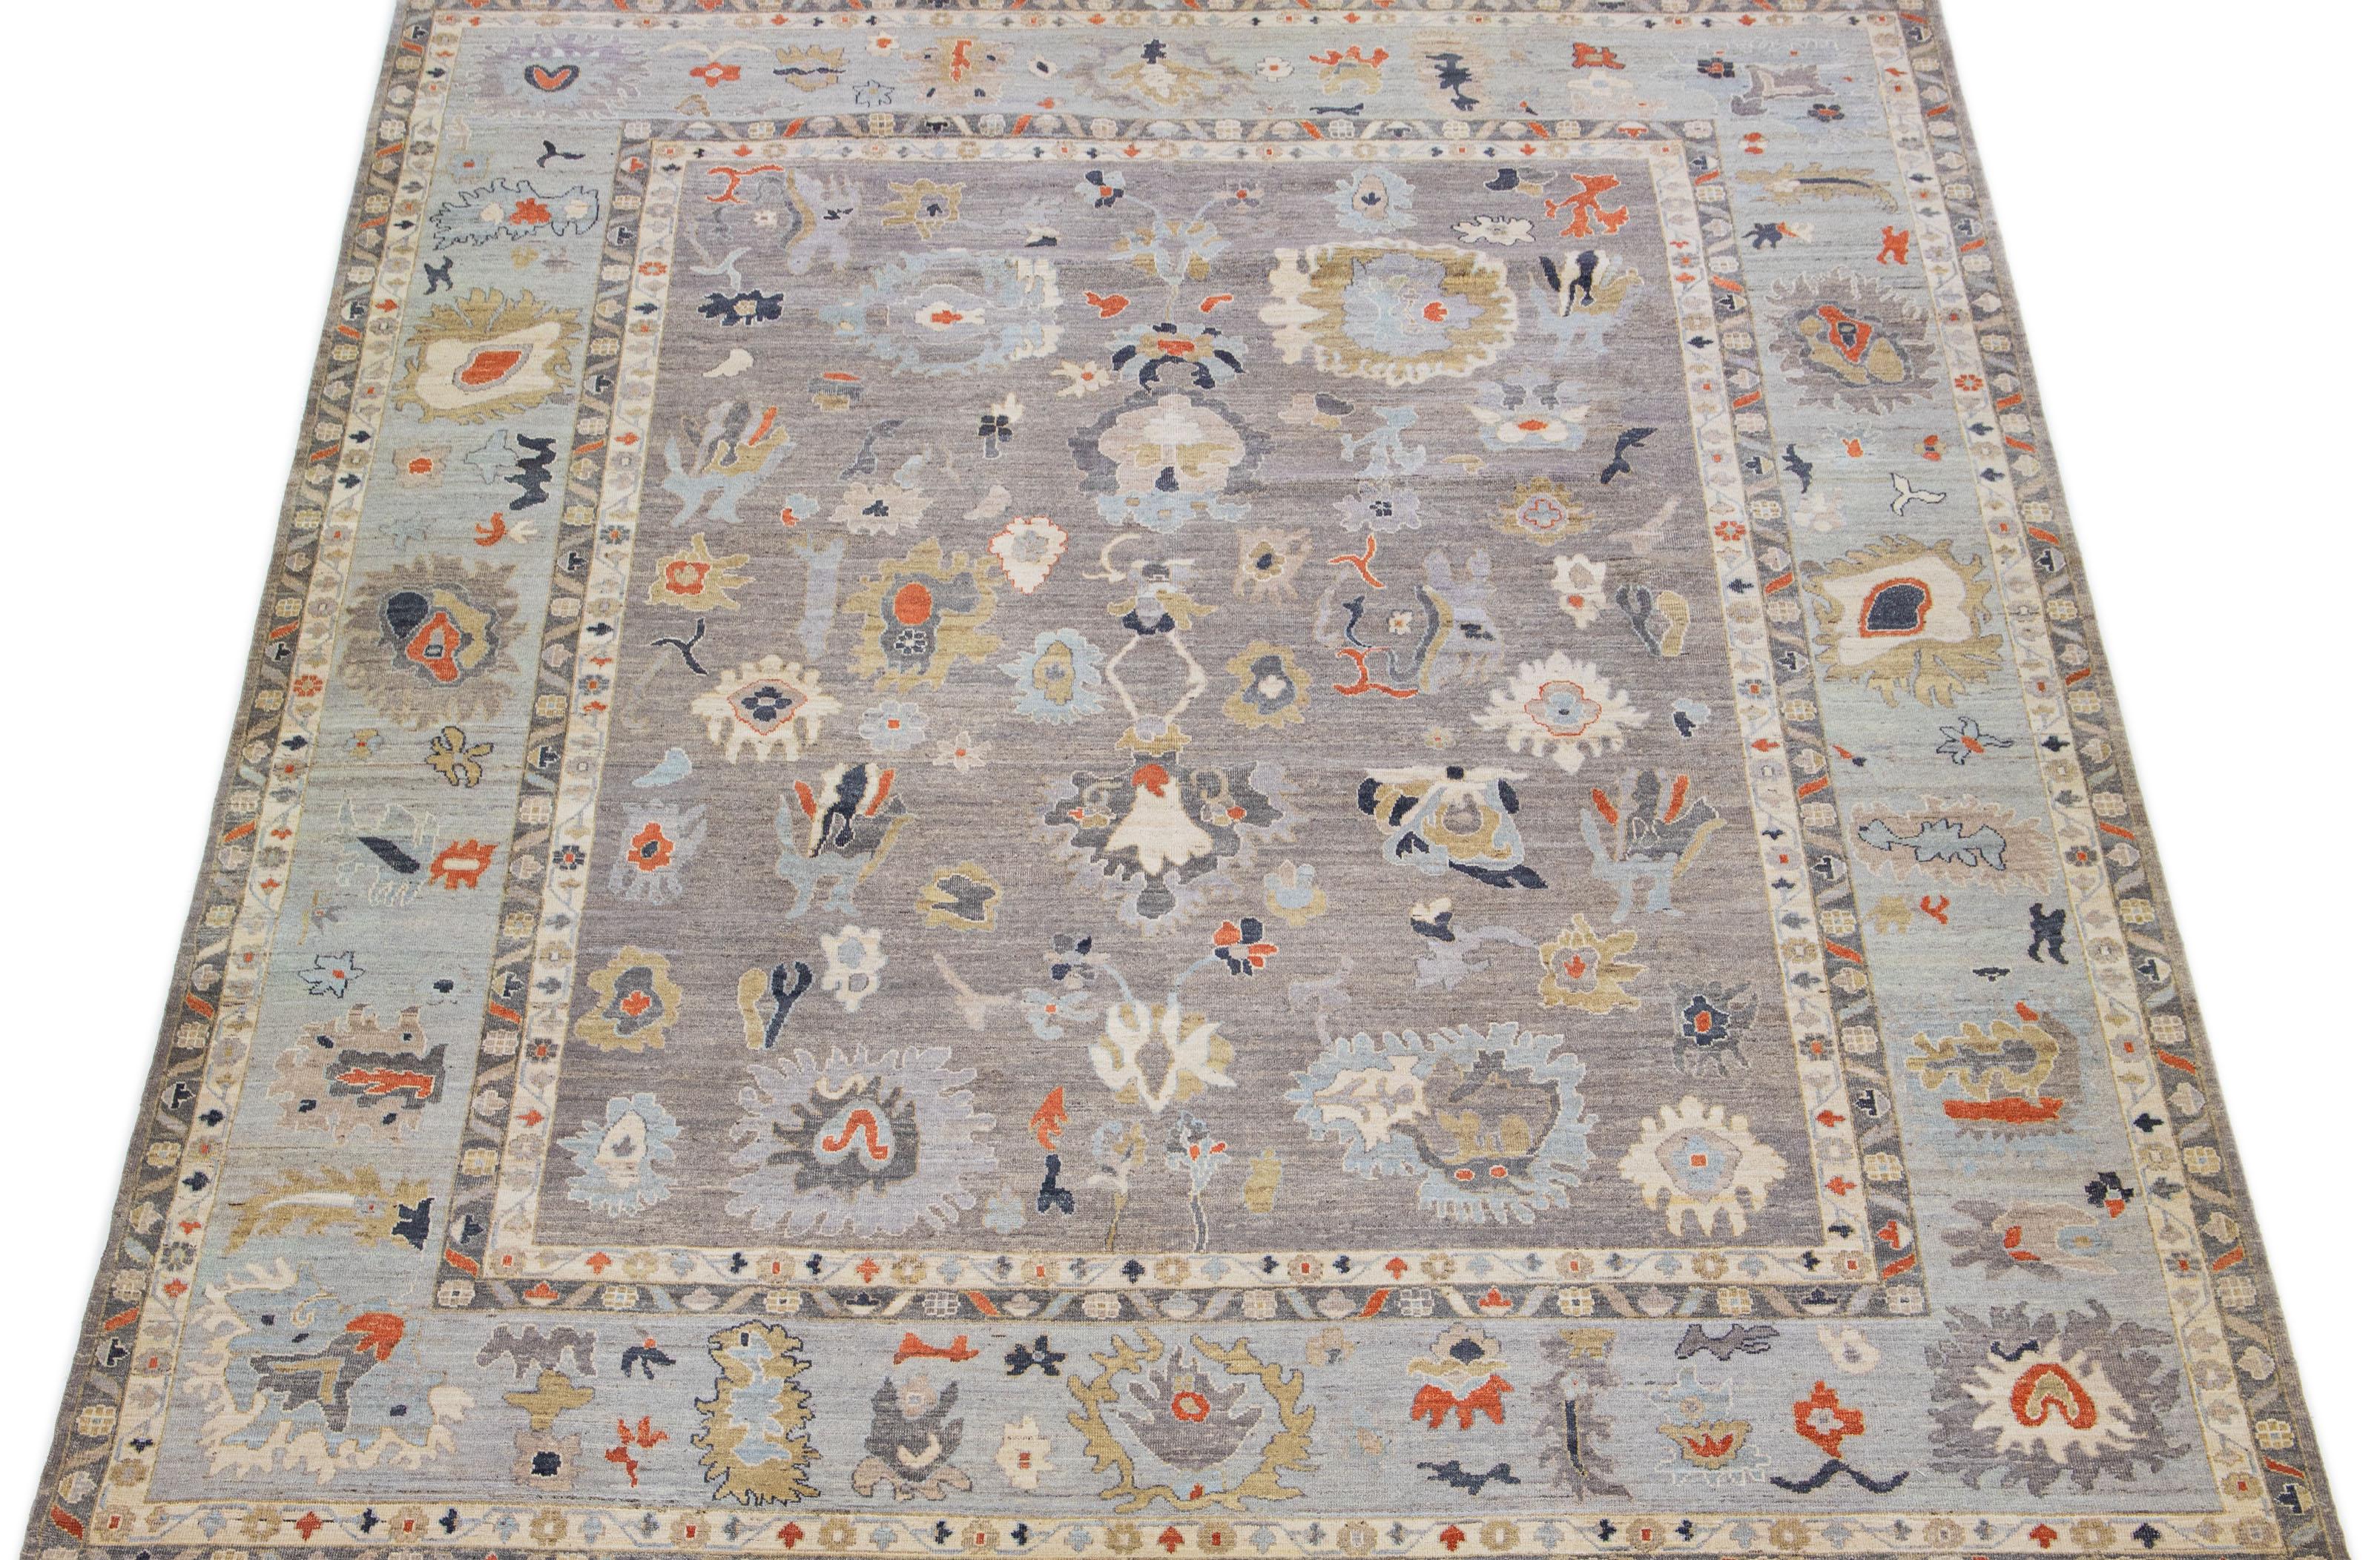 An exquisite oversized Oushak style hand knotted wool rug is presented, showcasing a stunning gray field with a light gray design frame. The rug further highlights rust, blue, and brown accents in a breathtaking floral motif that embellishes the